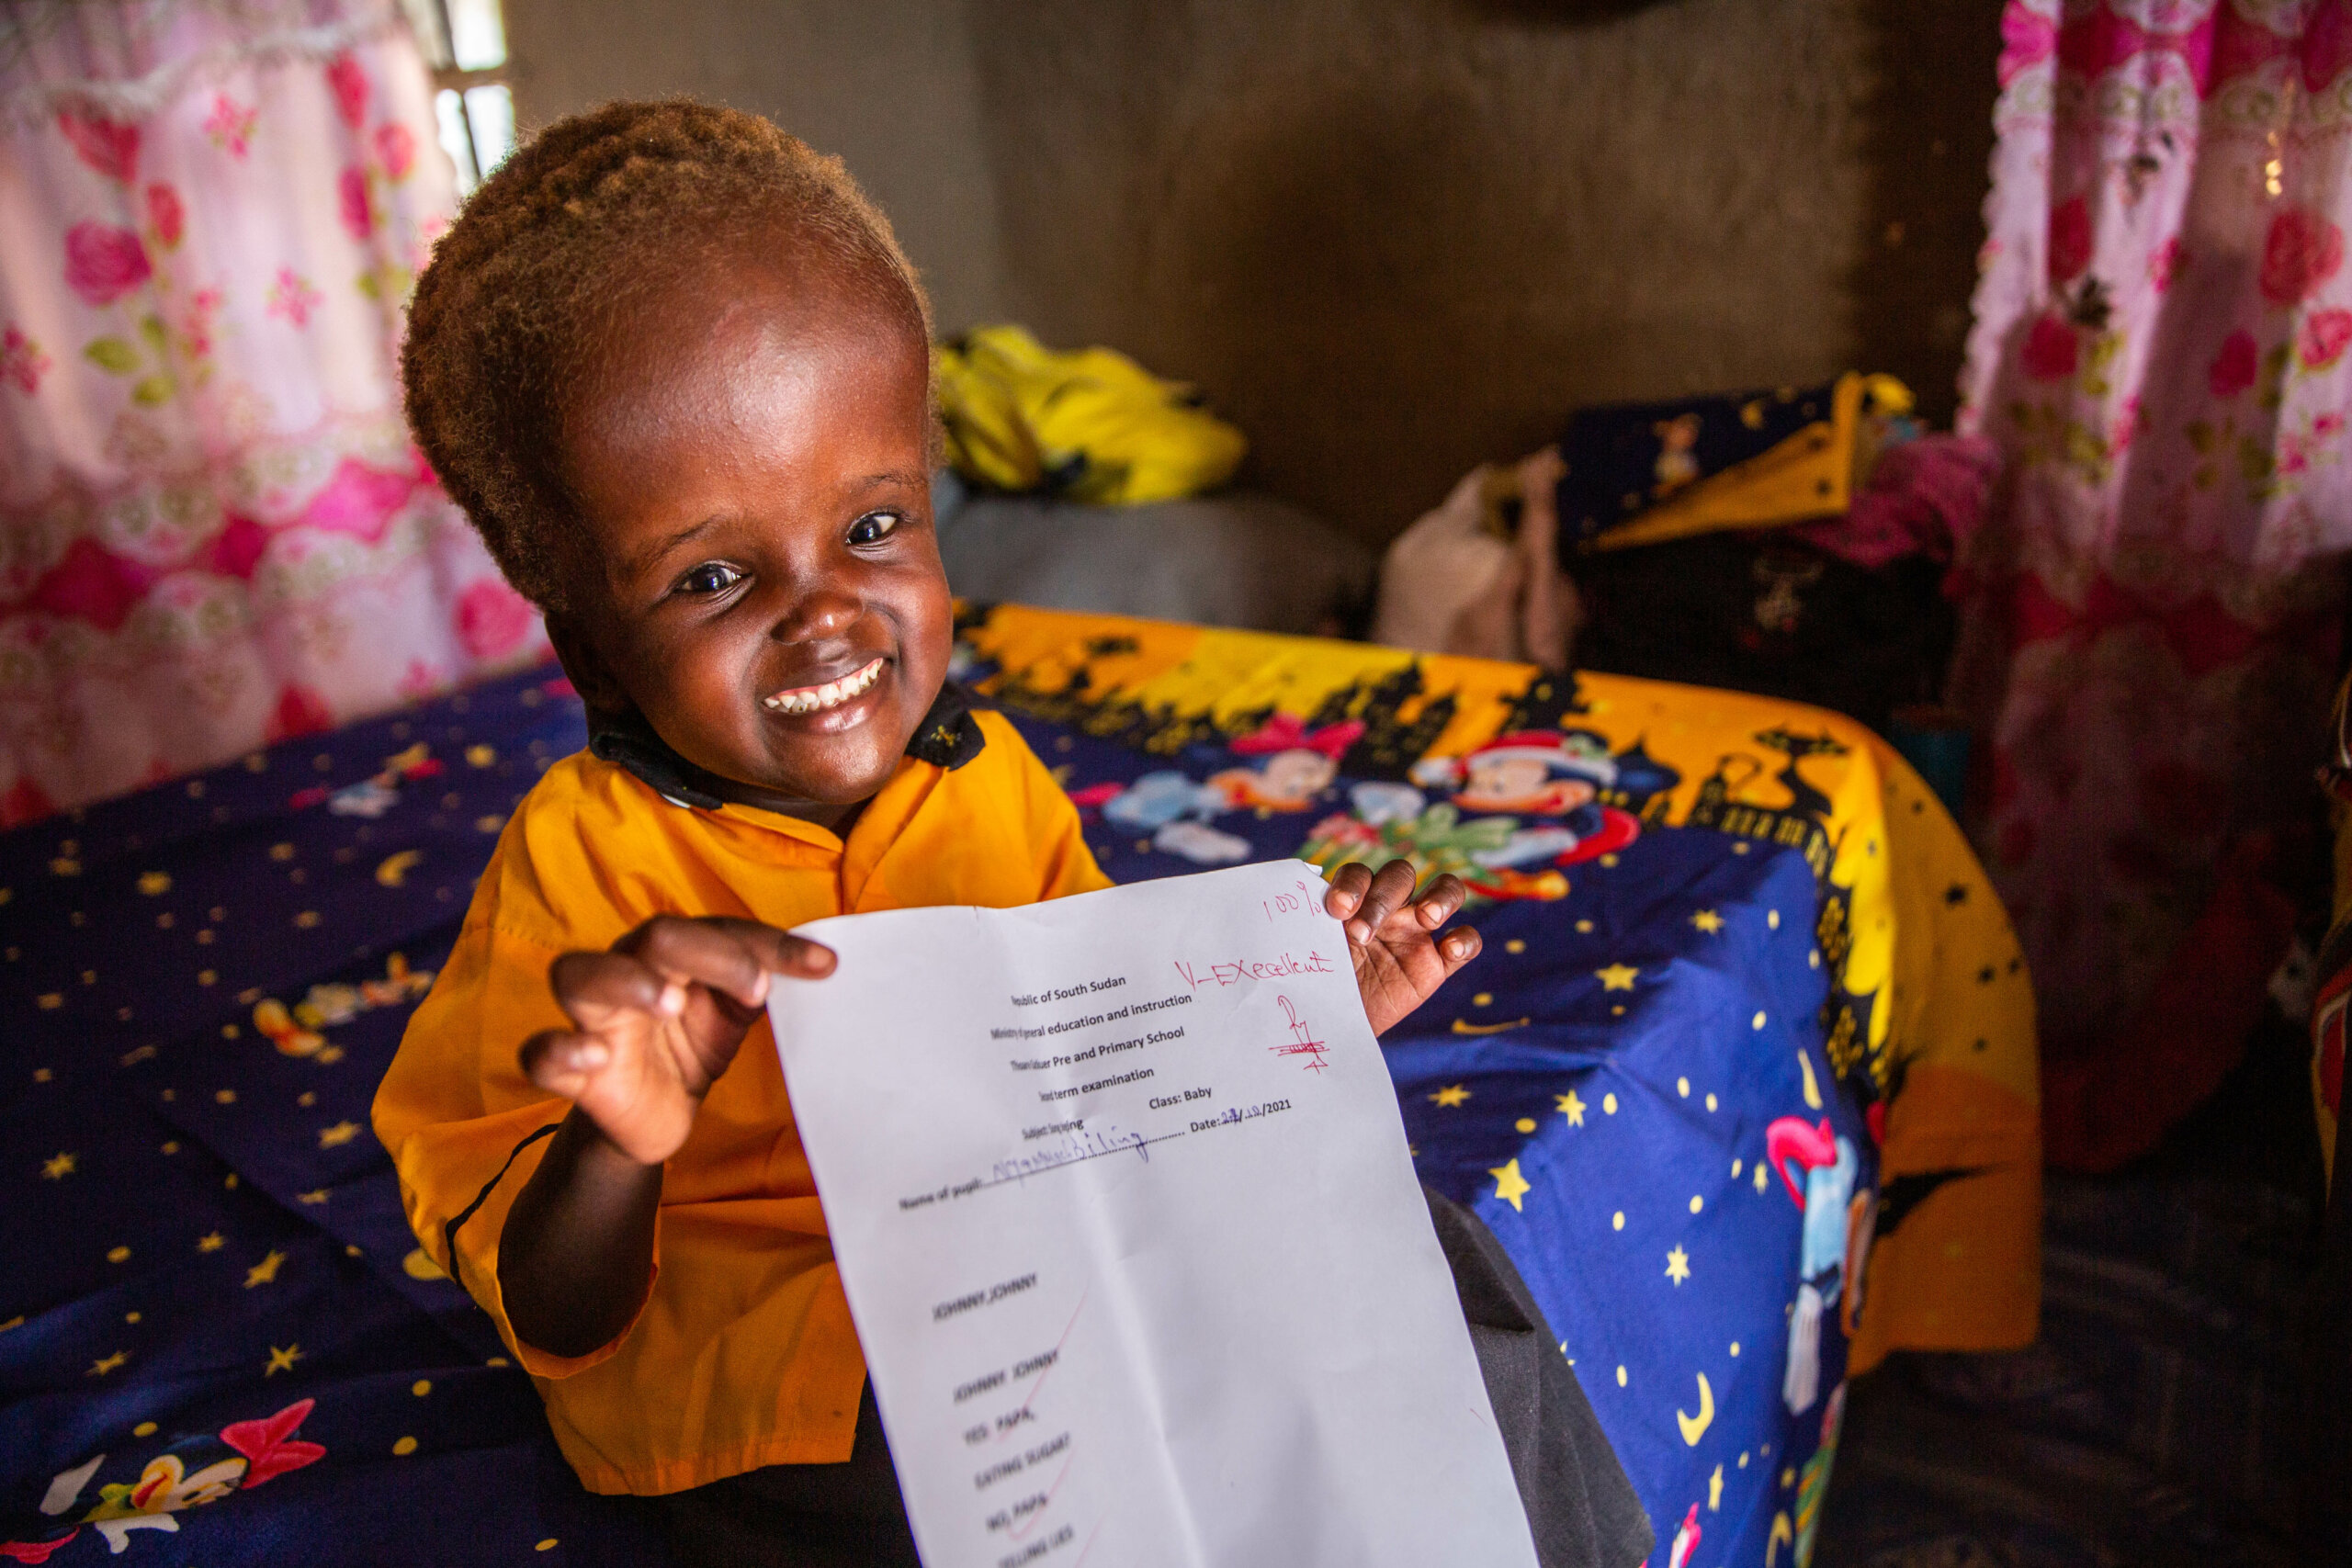 Four year-old Nyamush holds up her class test